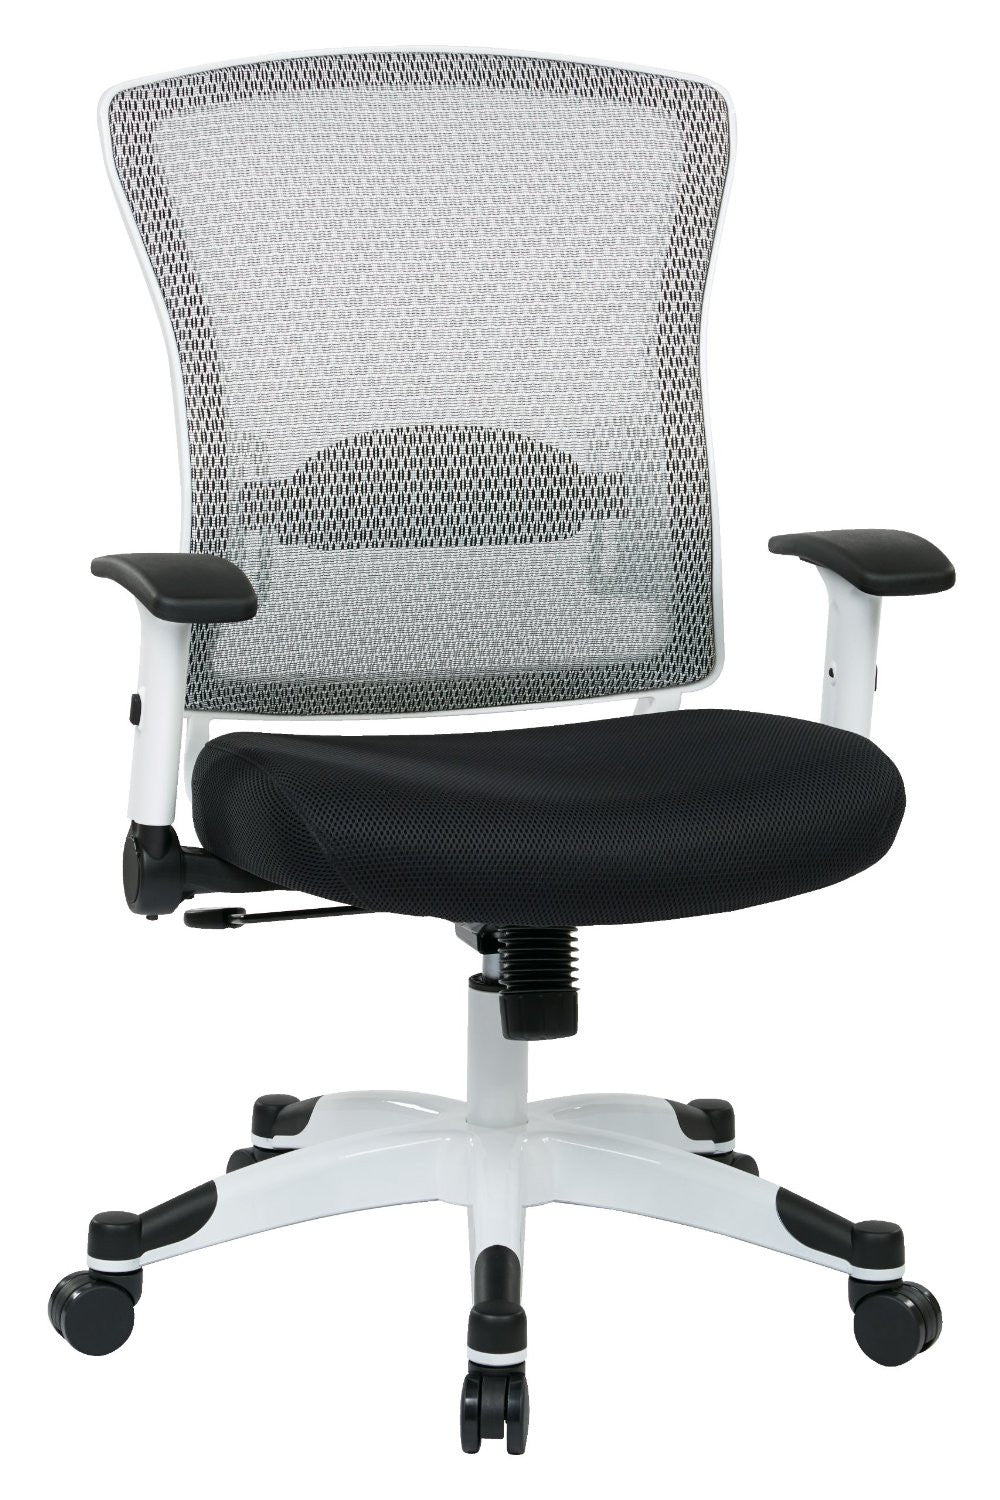 Space Seating 317w-w1c1f2w-5811 Space Seating White Frame Managers Chair With Breathable Mesh Back, Padded Mesh Seat, Adjustable Flip Arms, Adjustable